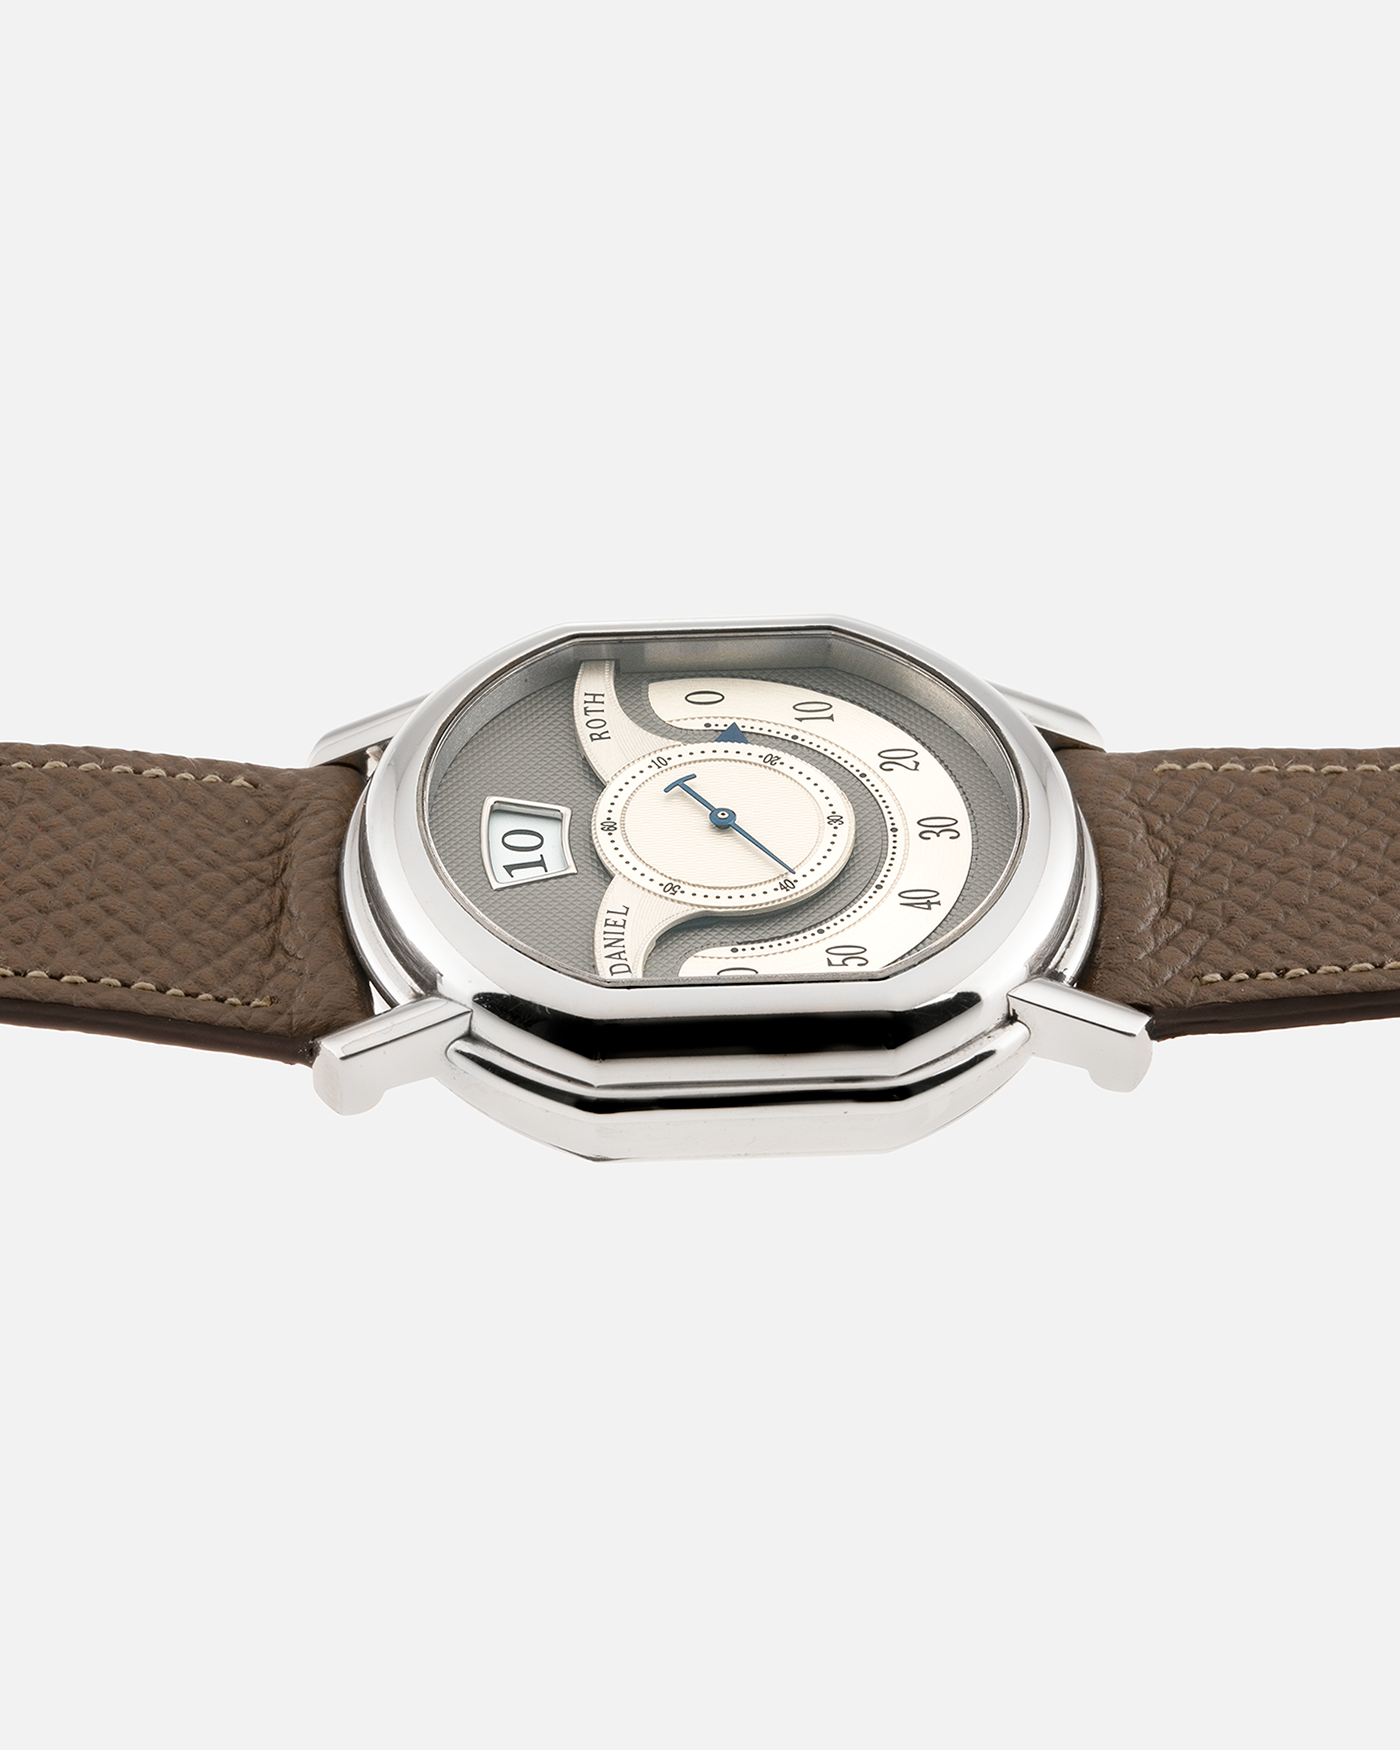 Brand: Daniel Roth Year: 1999 Model: 10th Anniversary Papillon Material: Platinum Movement: Daniel Roth Calibre DR113 Case Diameter: 35mm X 41mm X 11mm Strap: Nostime Taupe Textured Calf Strap with Platinum Tang Buckle